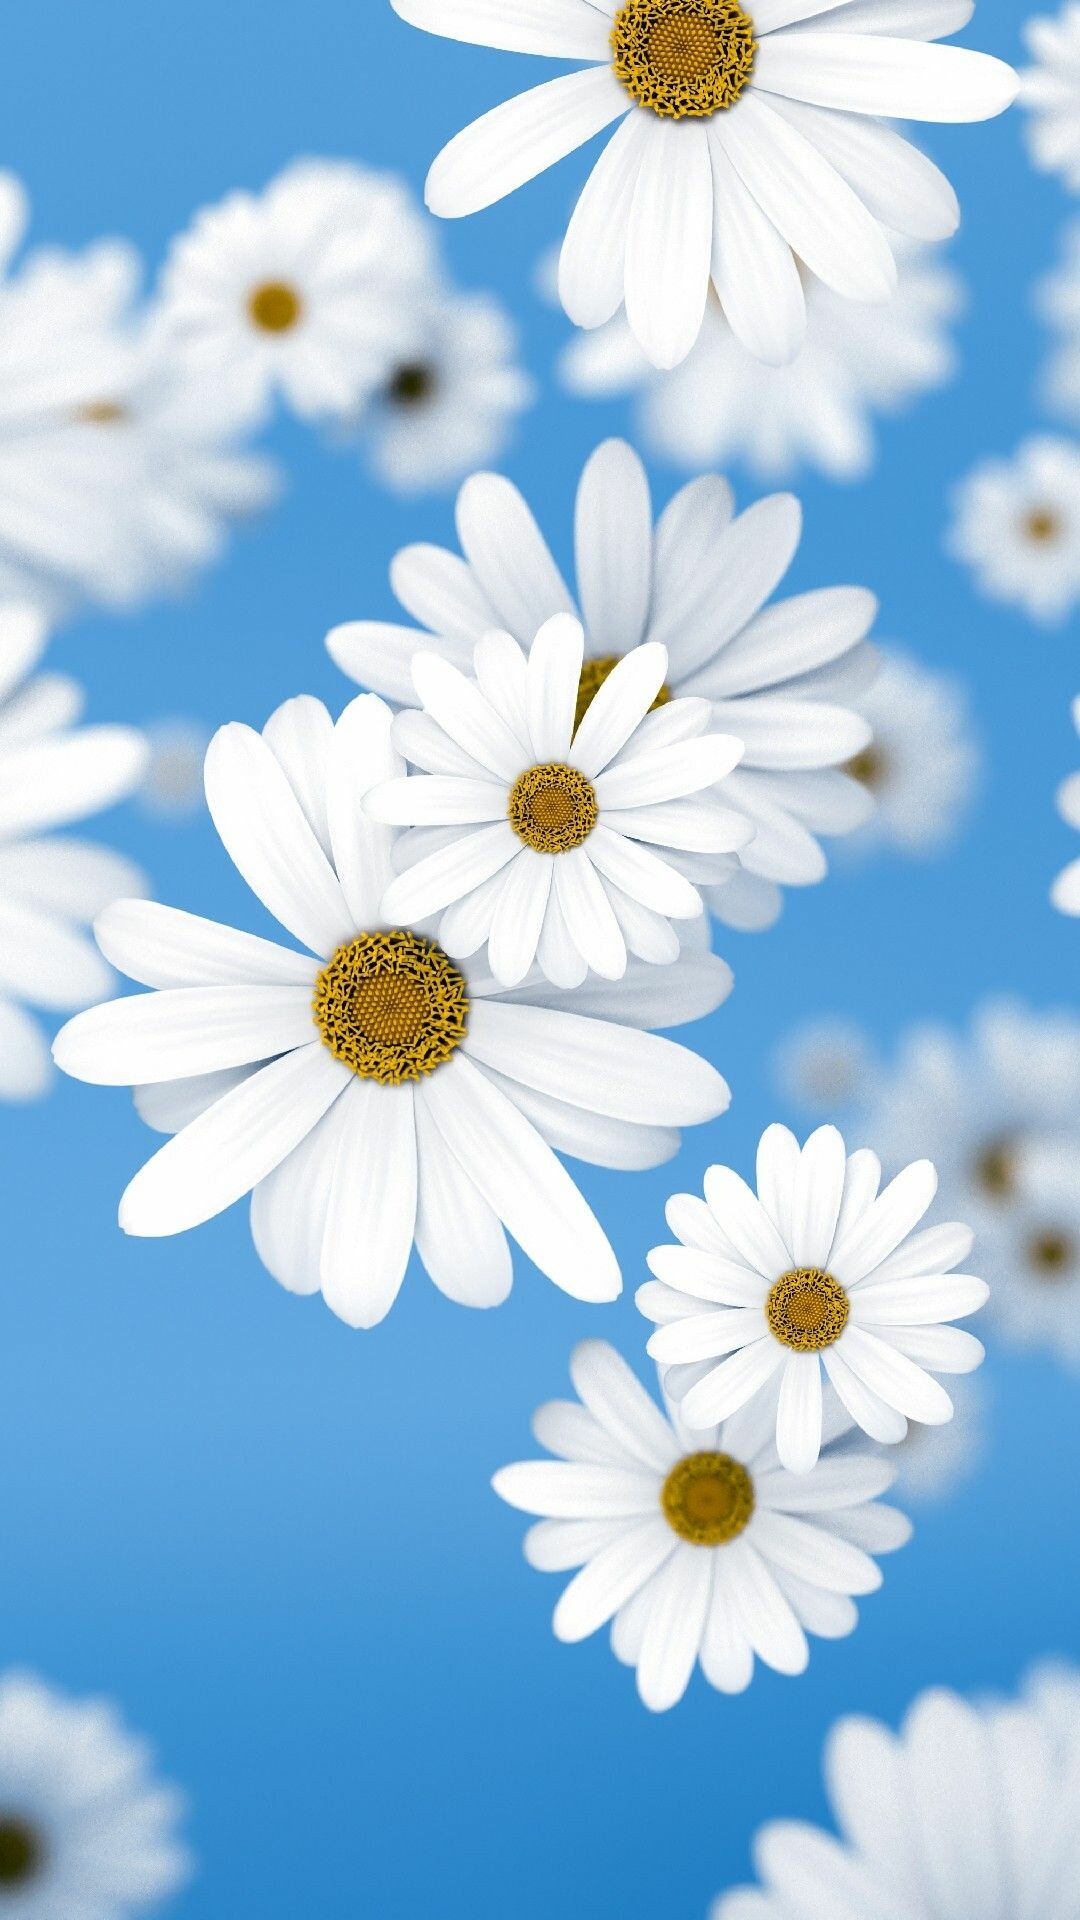 Daisy: Daisies are most commonly seen in white or many different shades of pink, although nowadays daisies come in just about any colour. 1080x1920 Full HD Background.